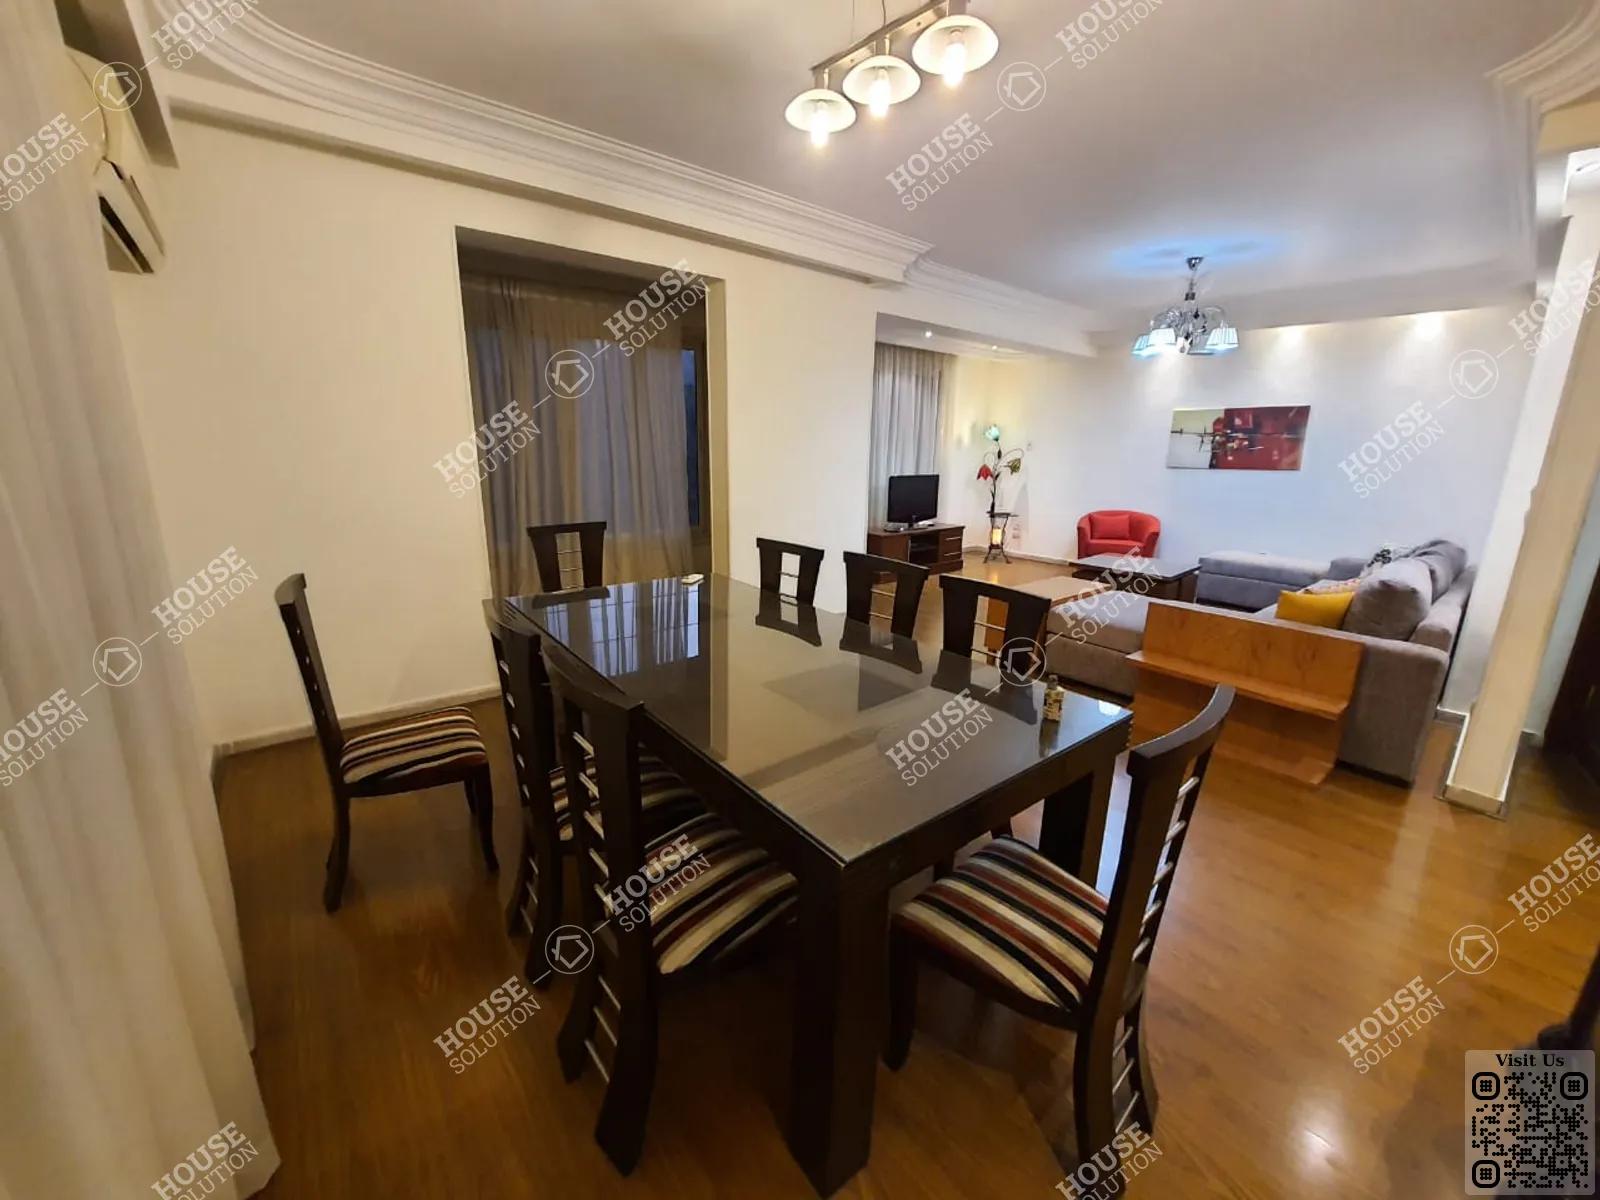 RECEPTION  @ Apartments For Rent In Maadi Maadi Degla Area: 180 m² consists of 3 Bedrooms 3 Bathrooms Modern furnished 5 stars #4319-2